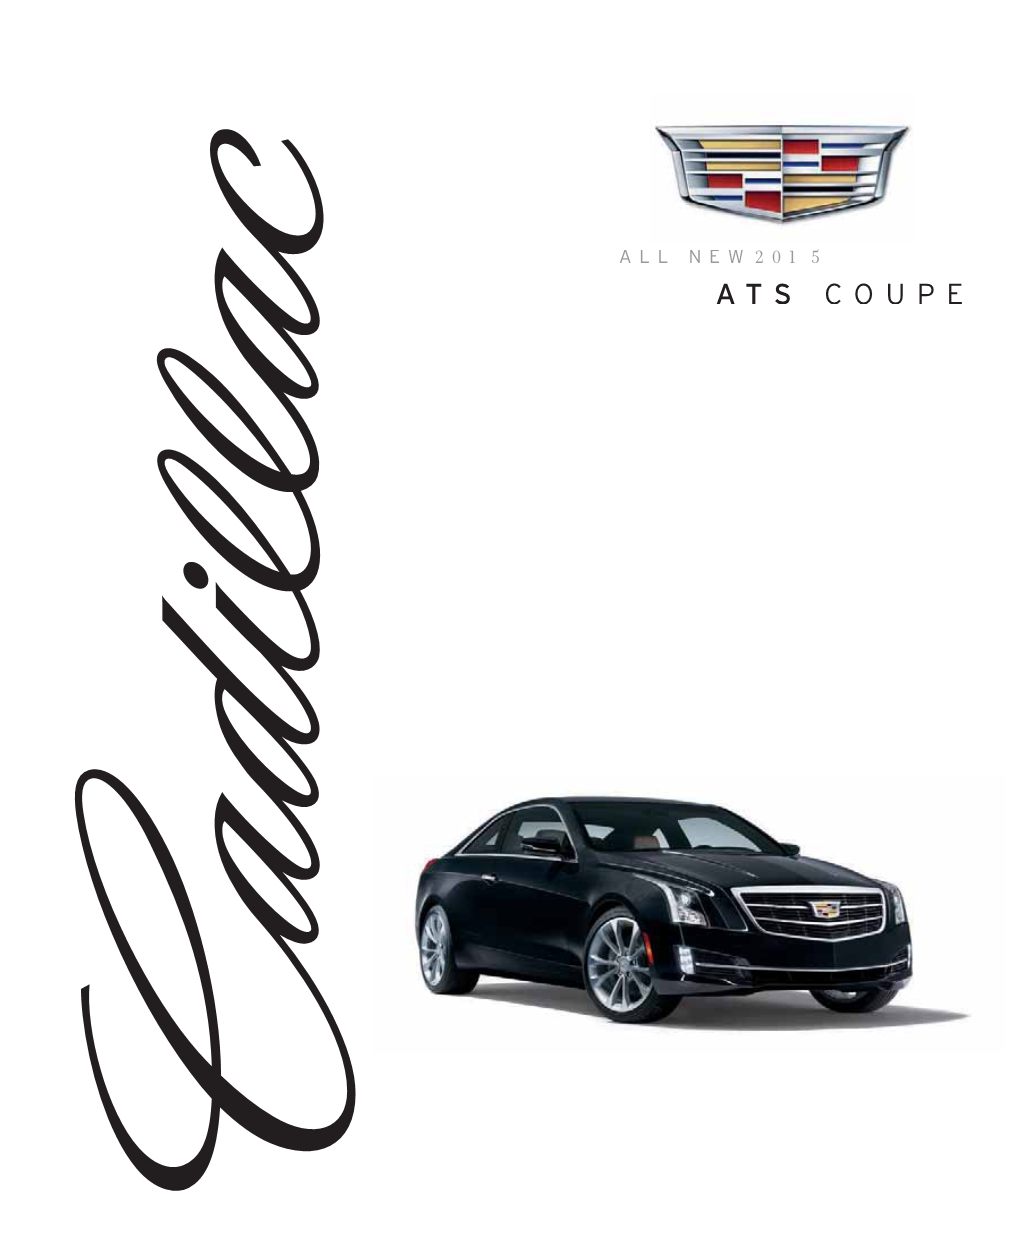 COUPE ATS Coupe Premium Collection / Crystal White Tricoat Tricoat White / Crystal Collection Premium Coupe ATS